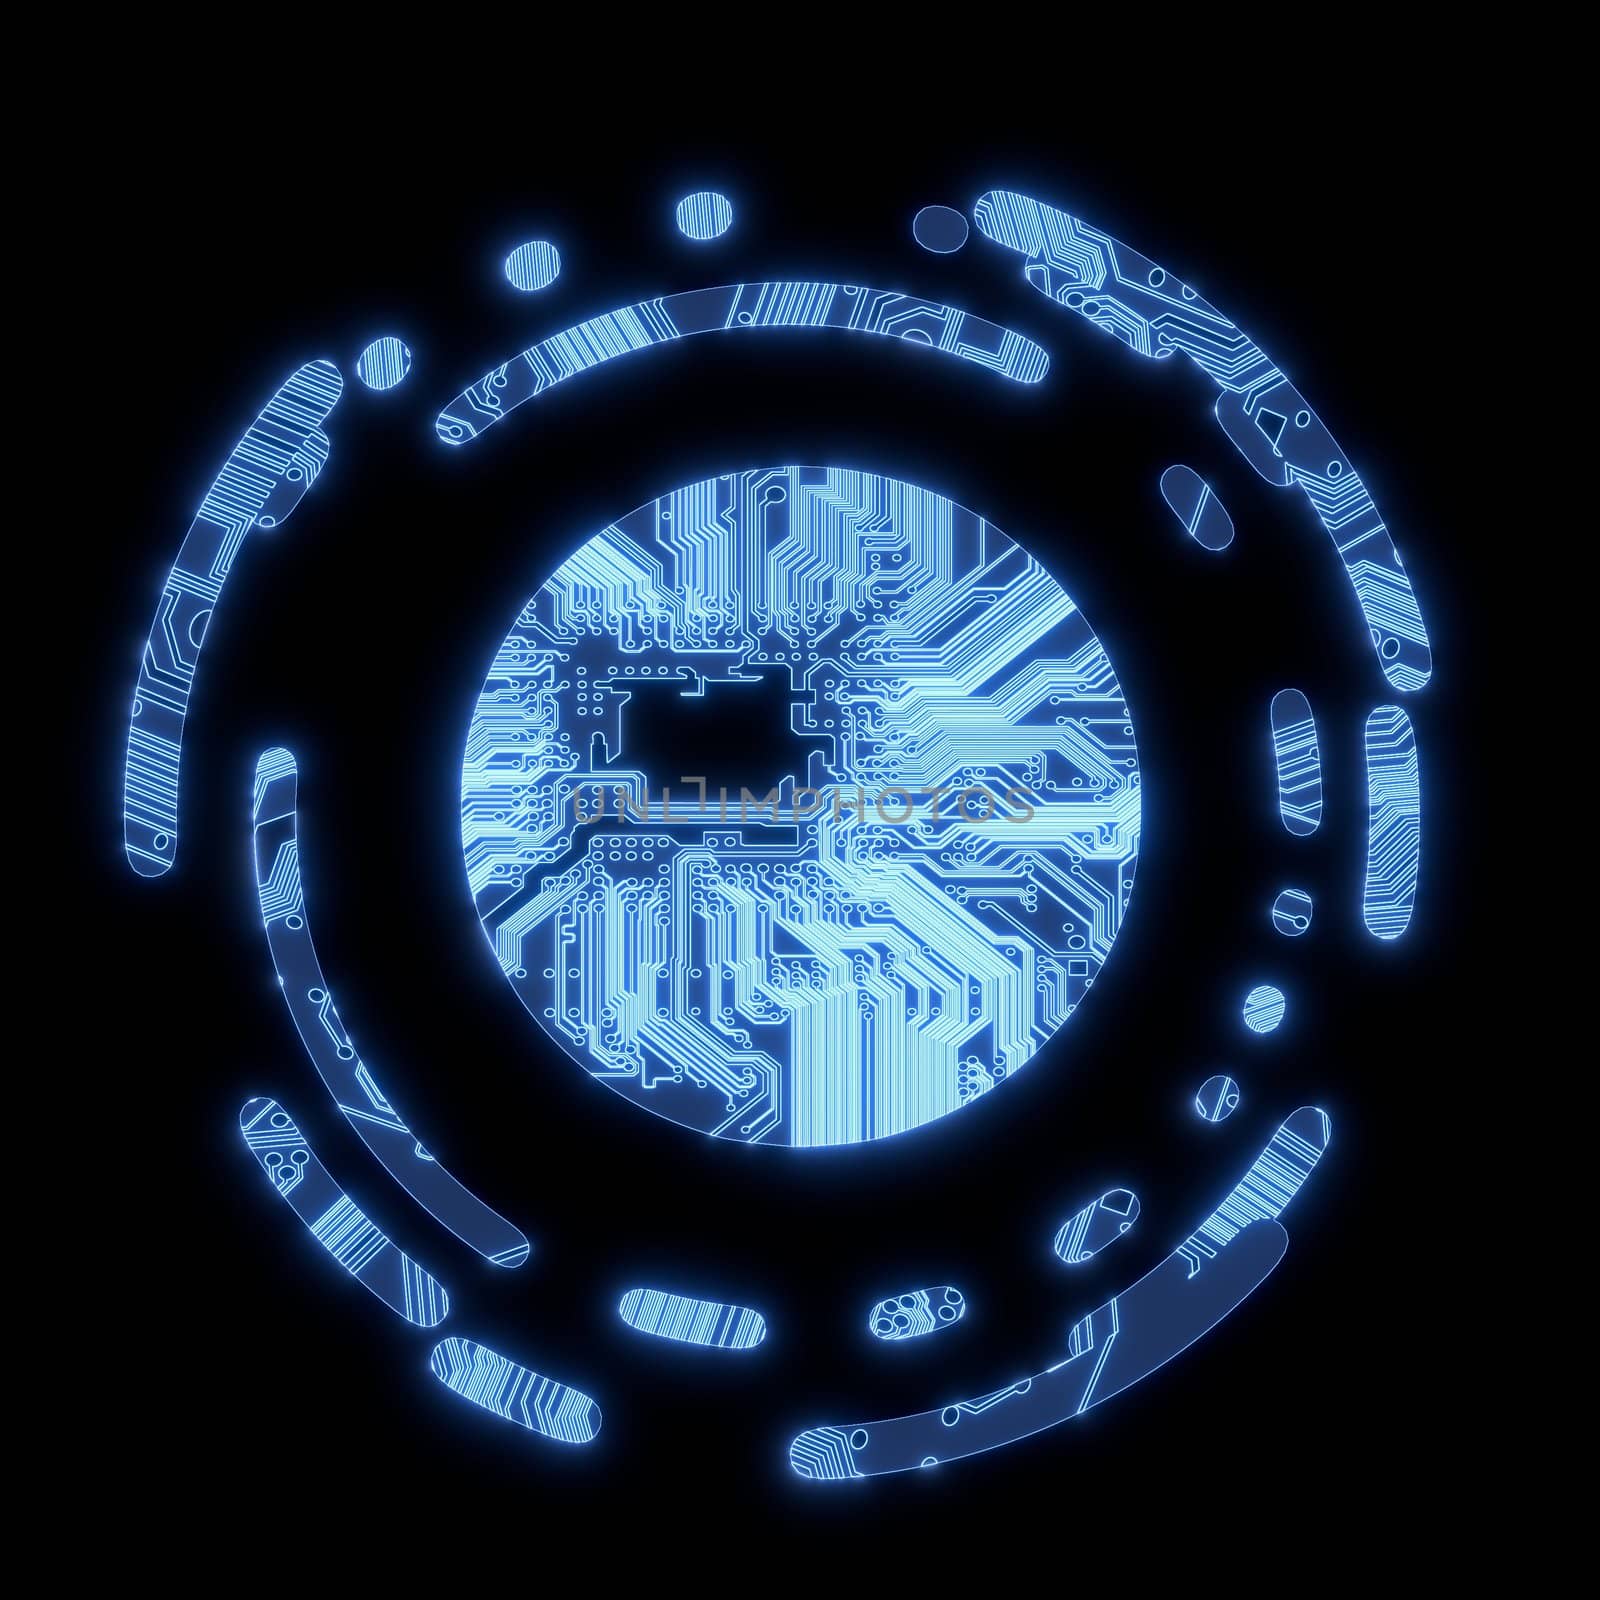 Illuminated blue computer circle symbol on a computer chip by onirb